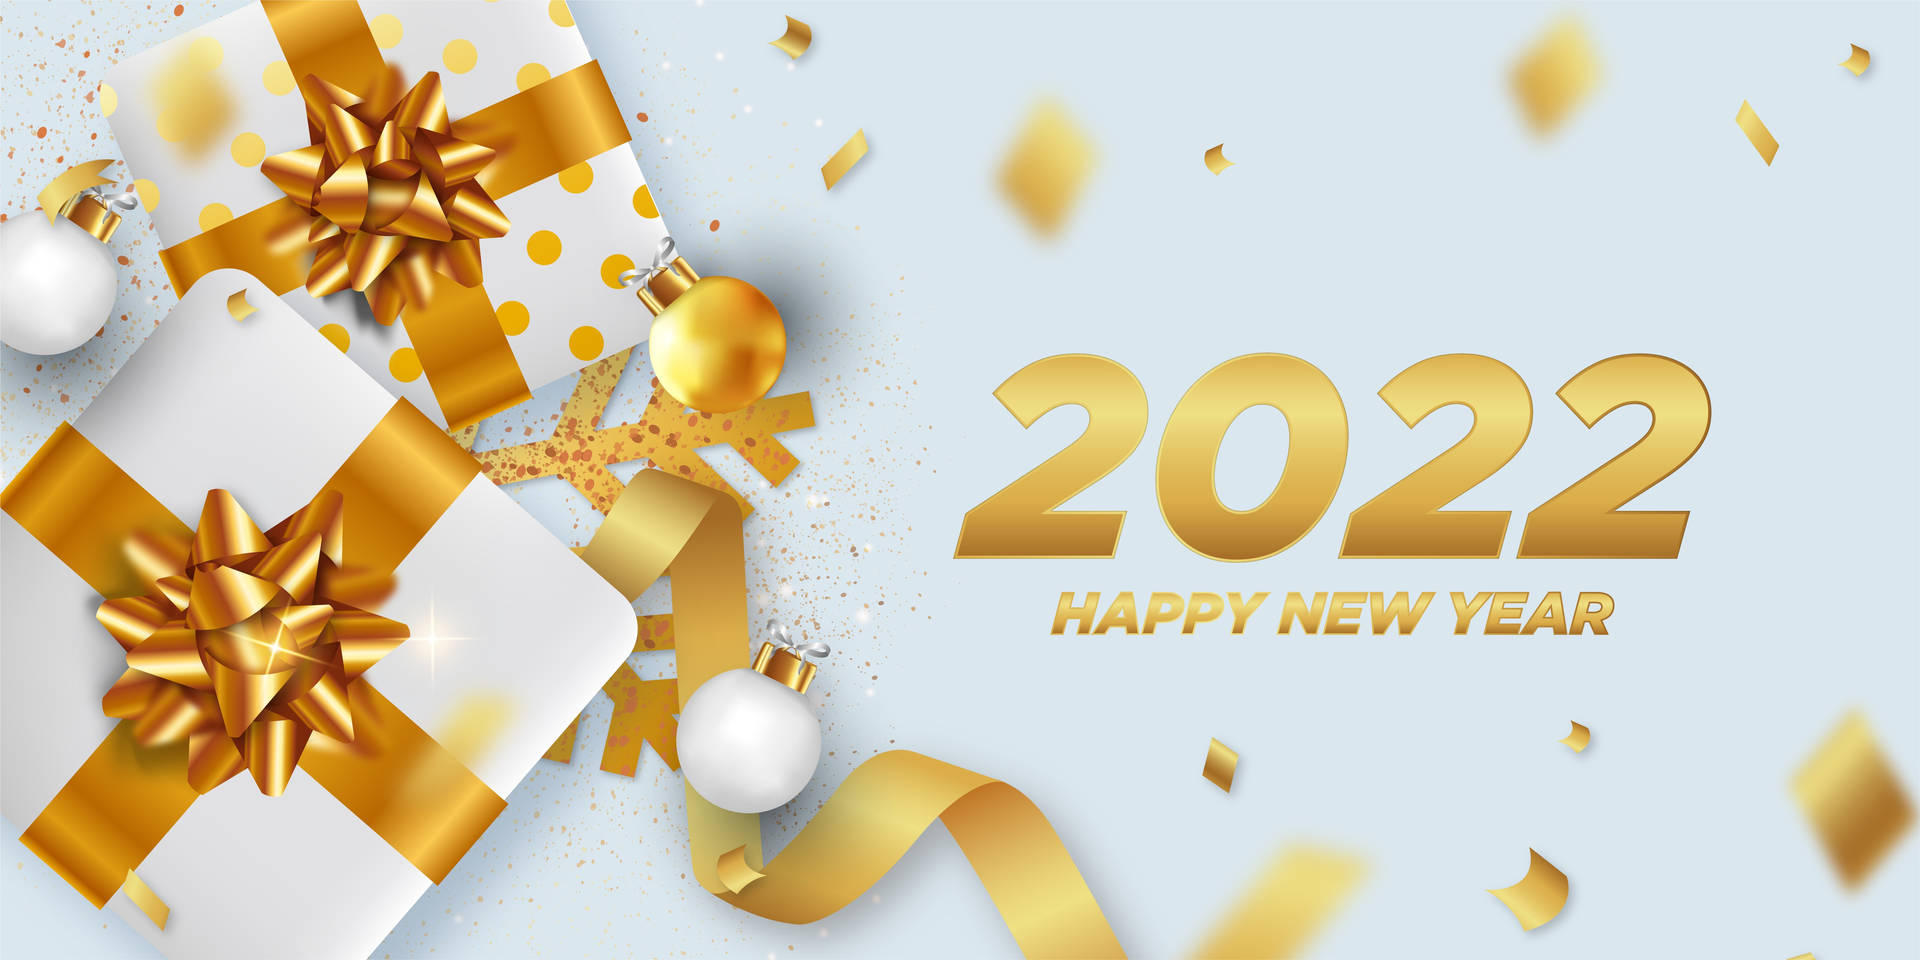 Happy New Year 2022 Gold Gifts Background